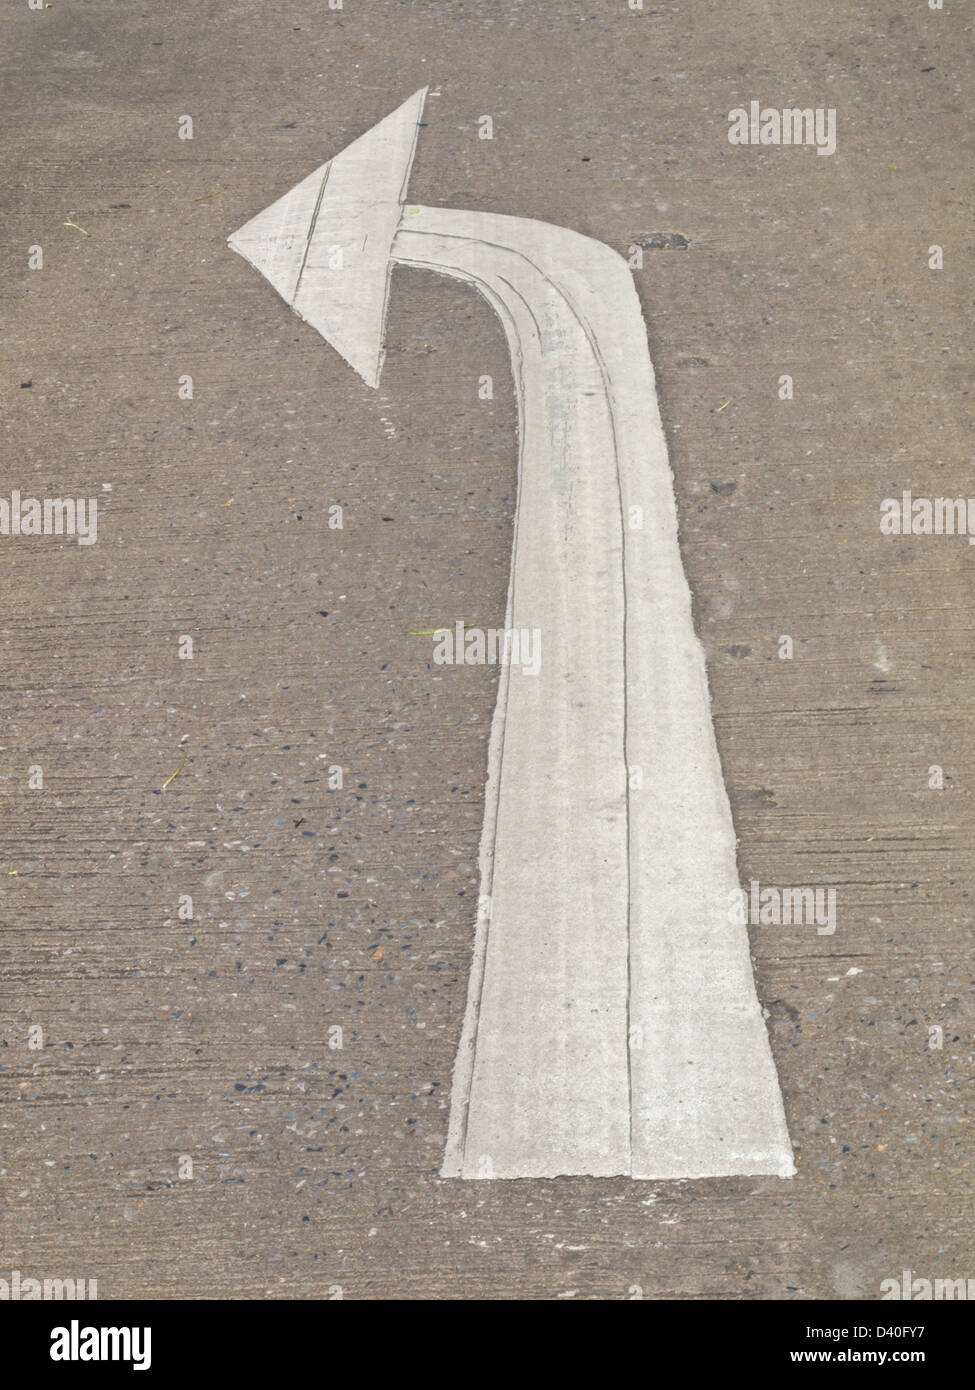 Turn left white arrow on road pavement as background Stock Photo